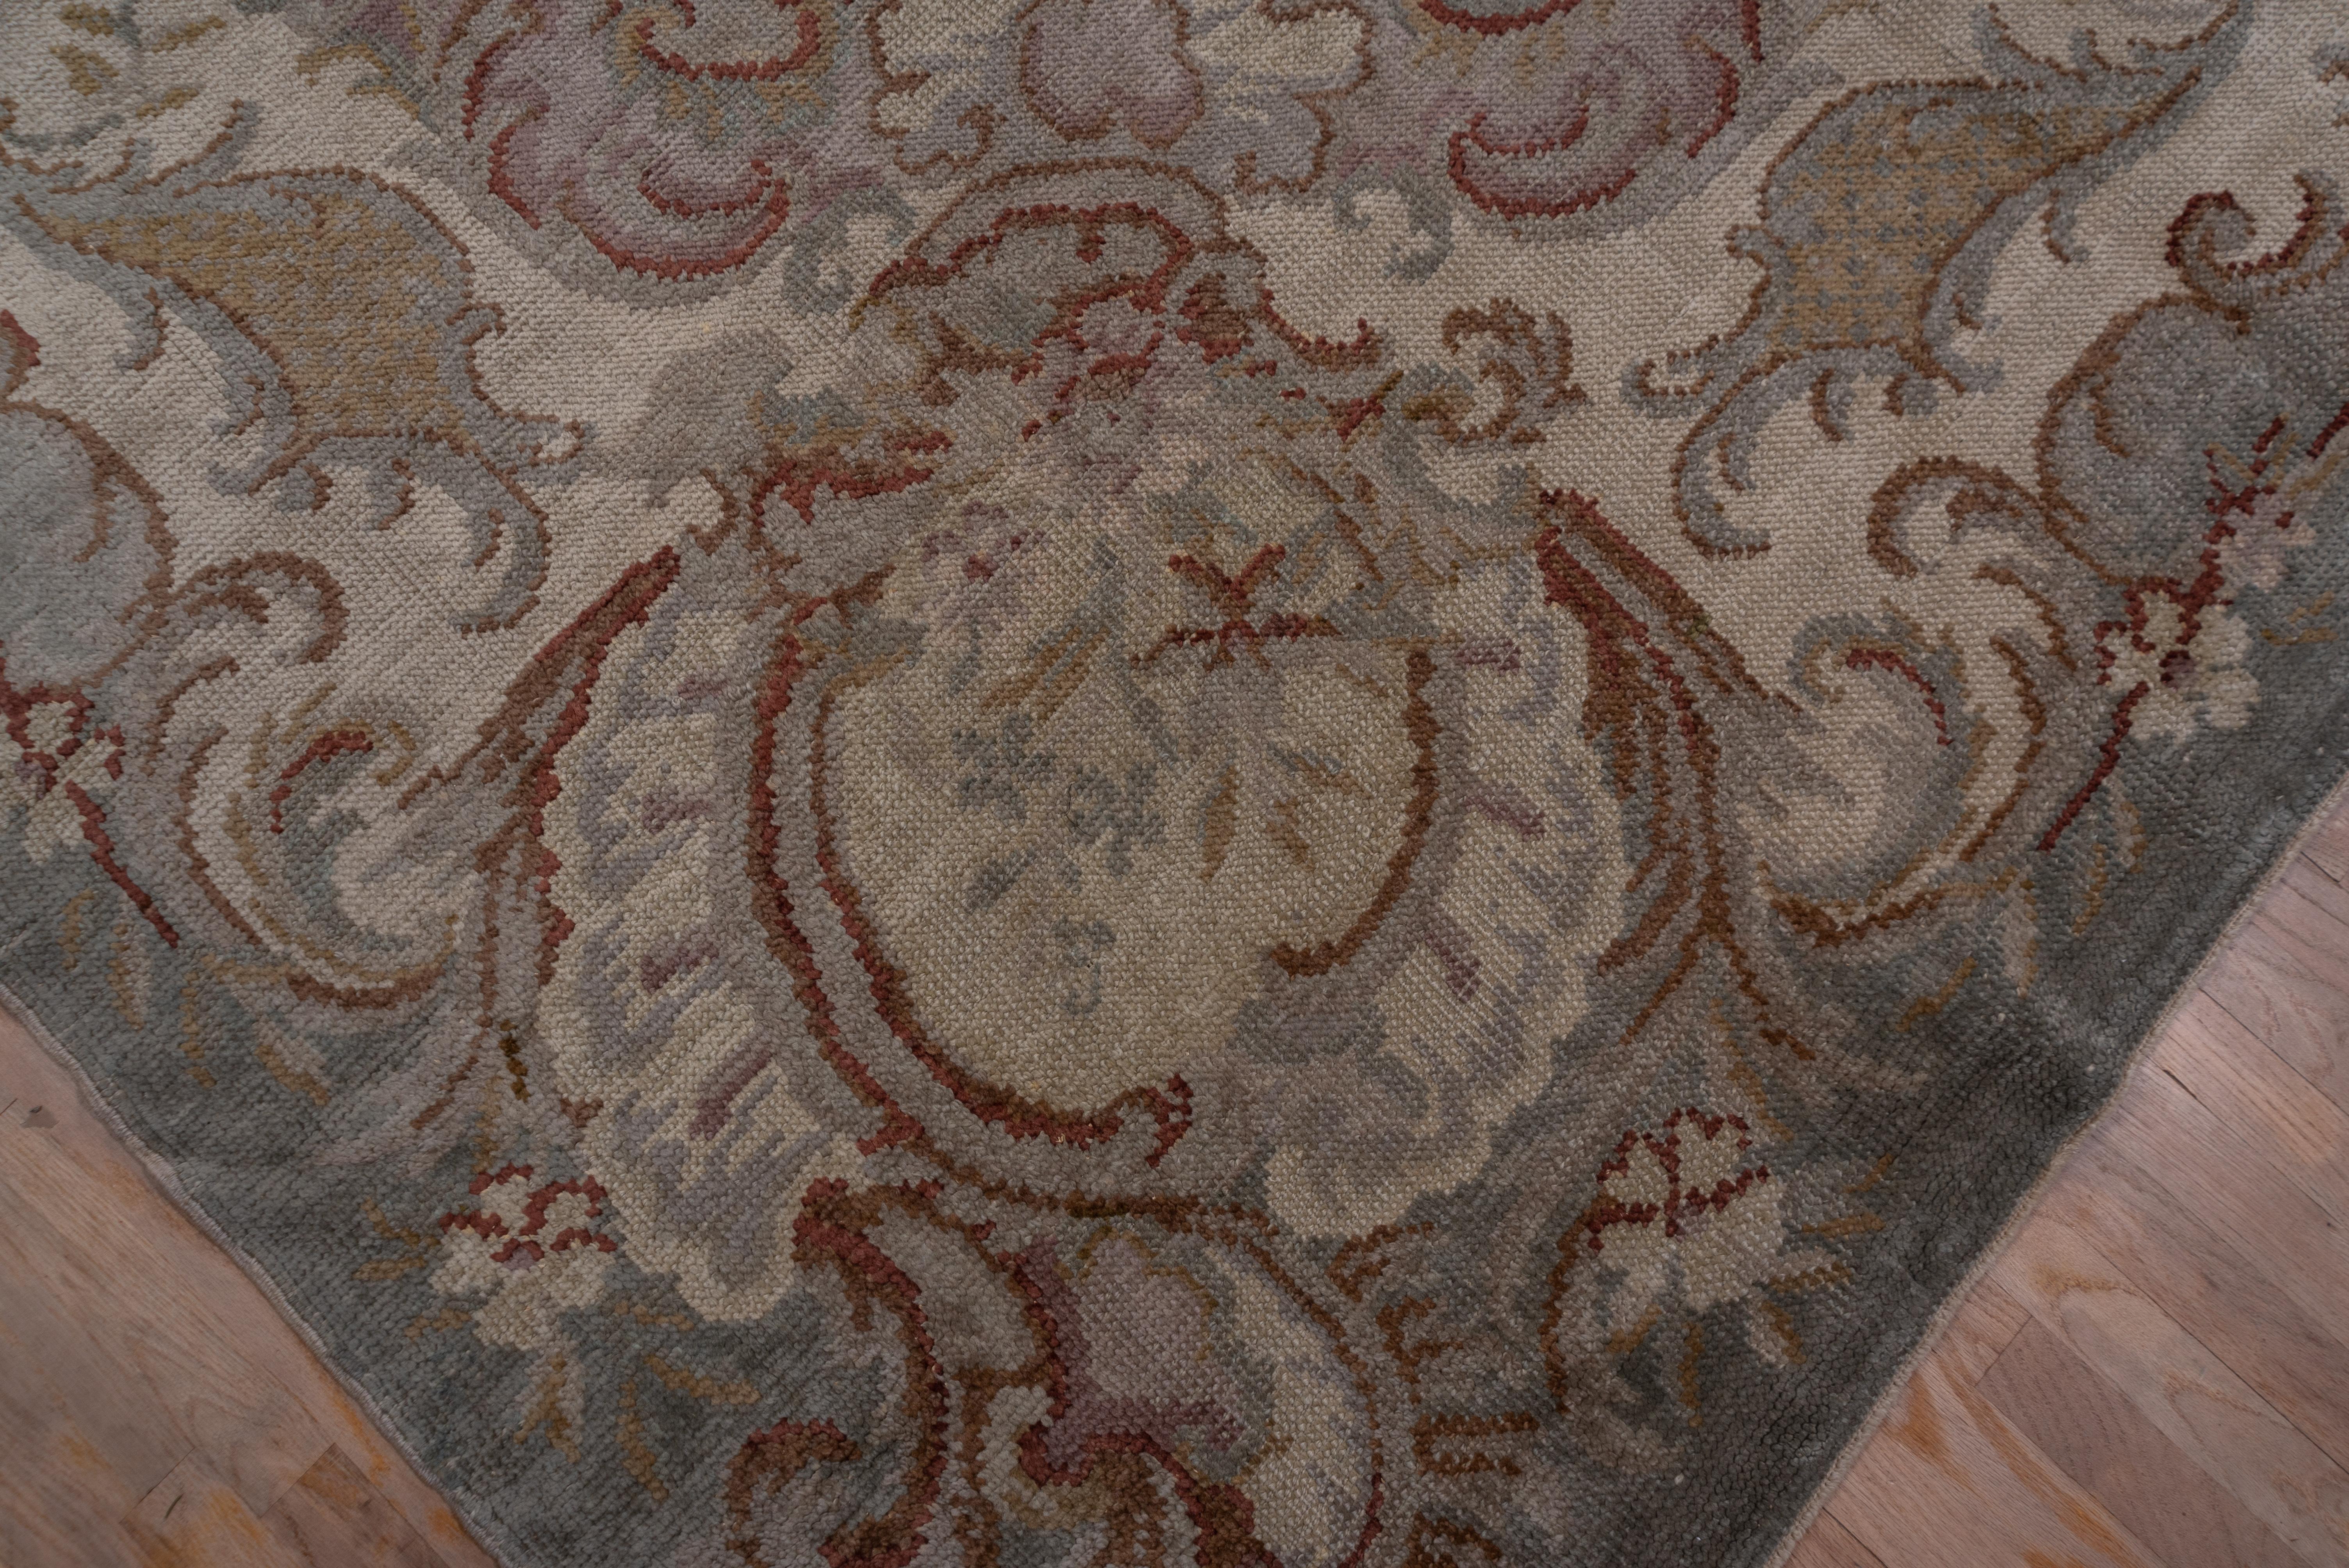 Hand-Woven Antique French Savonnerie Carpet